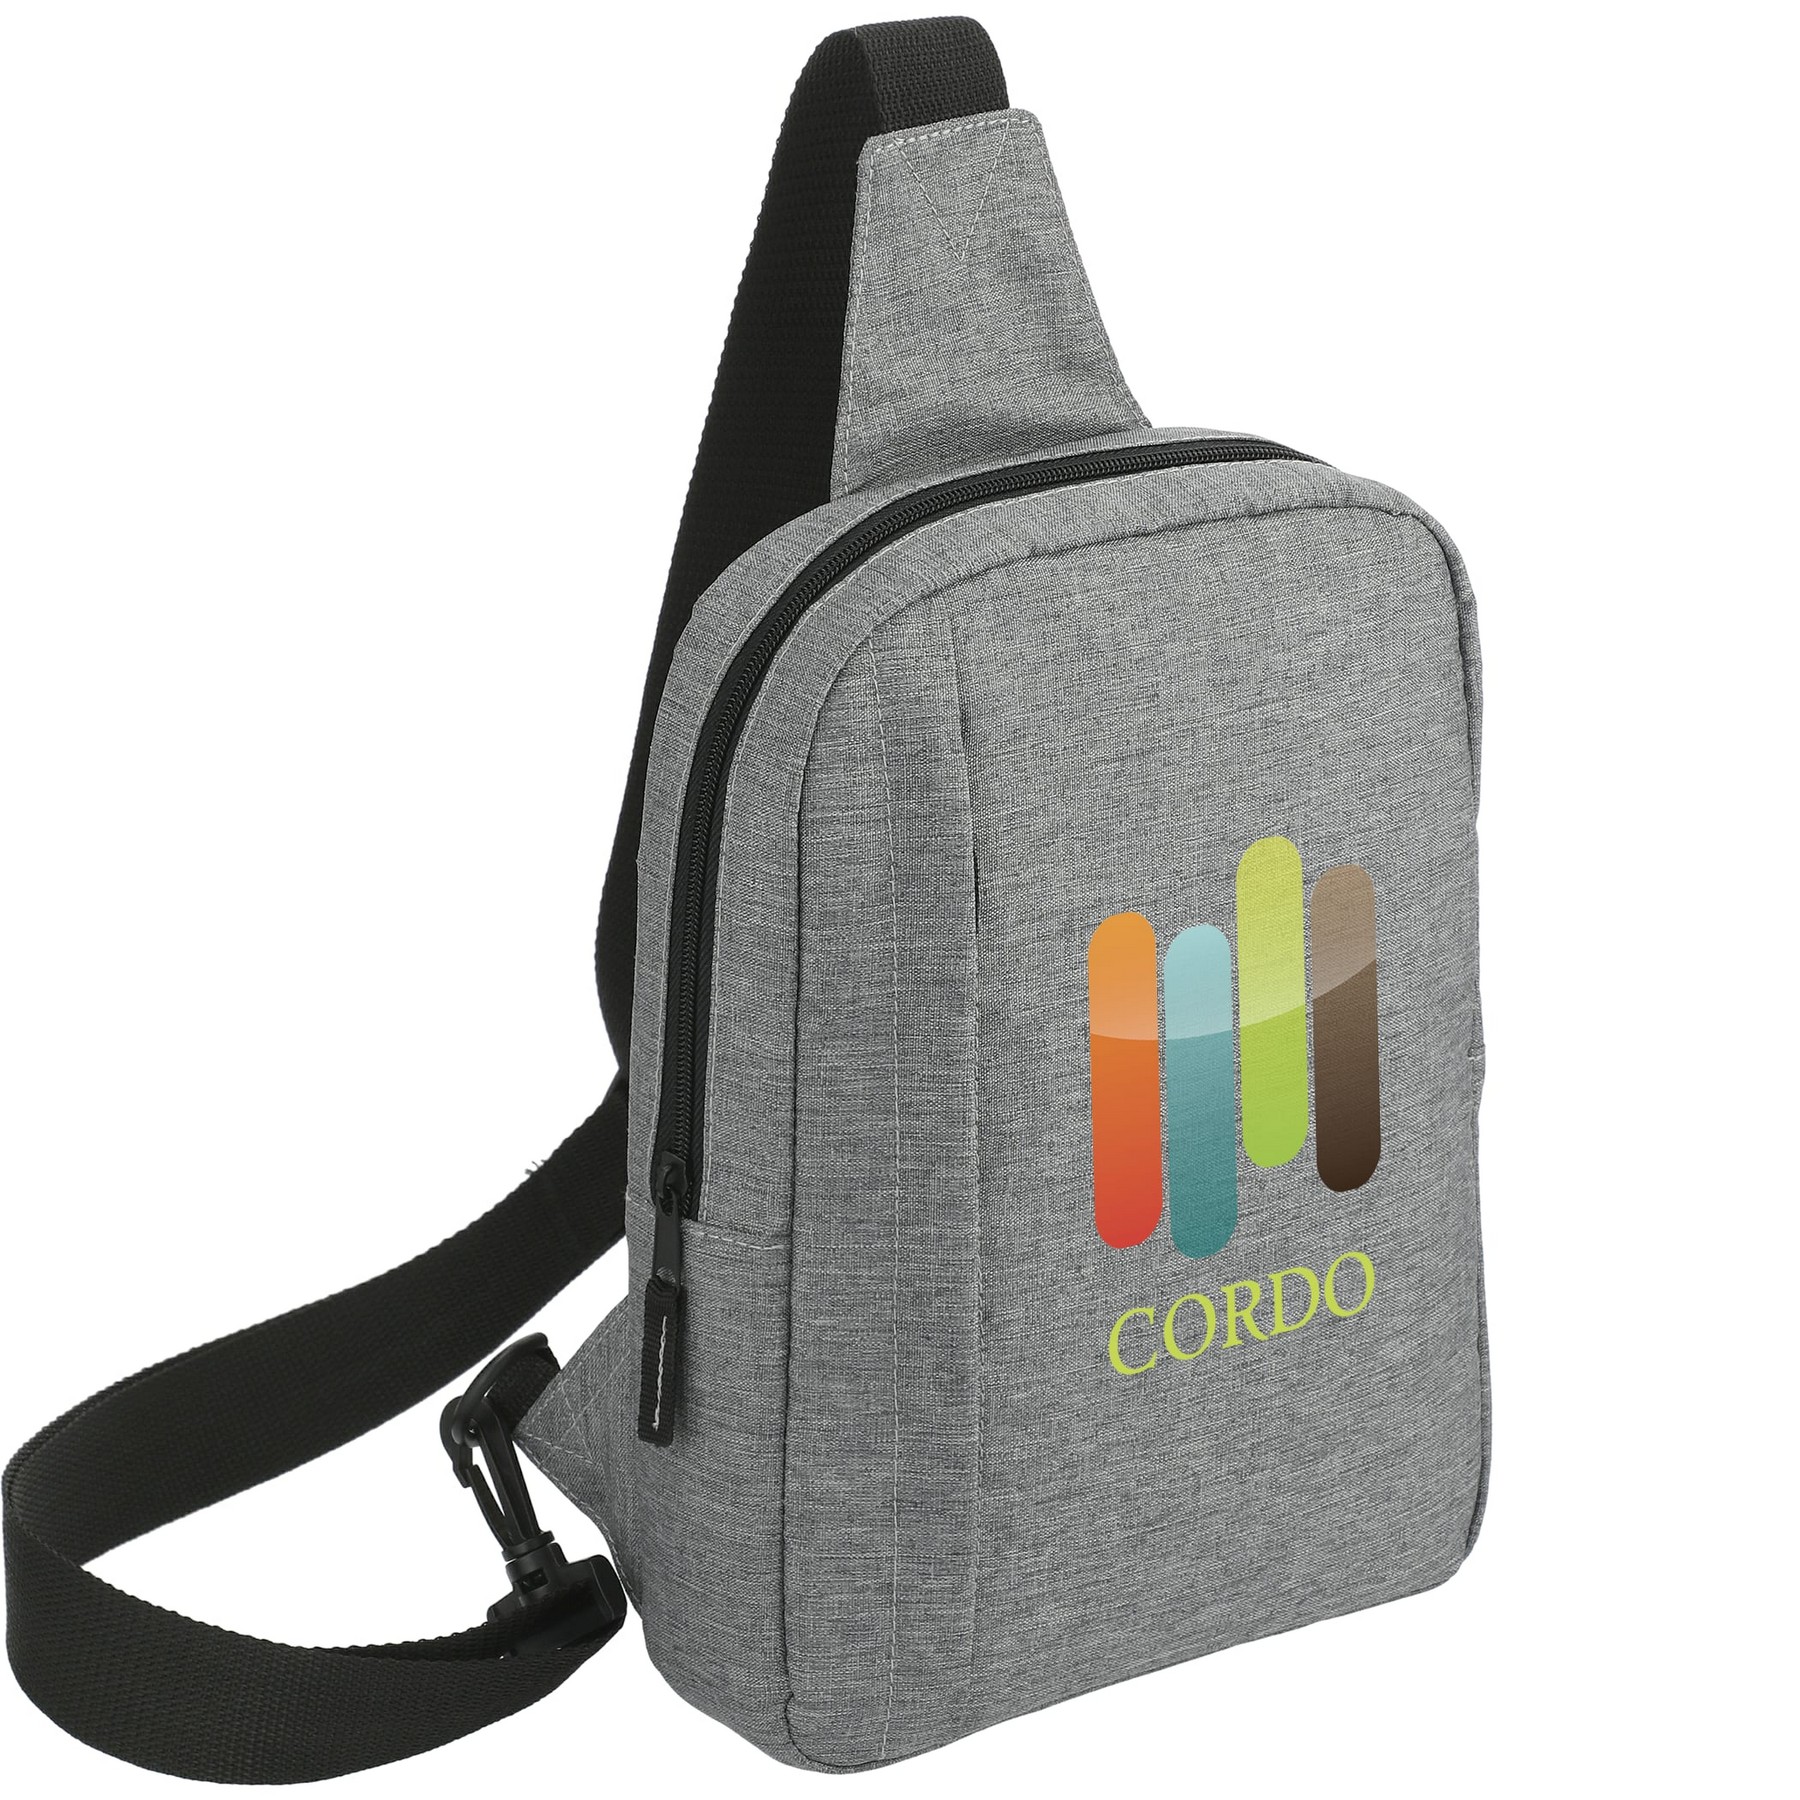 messenger bags, butt packs, cross body bags and fanny packs as promotional products